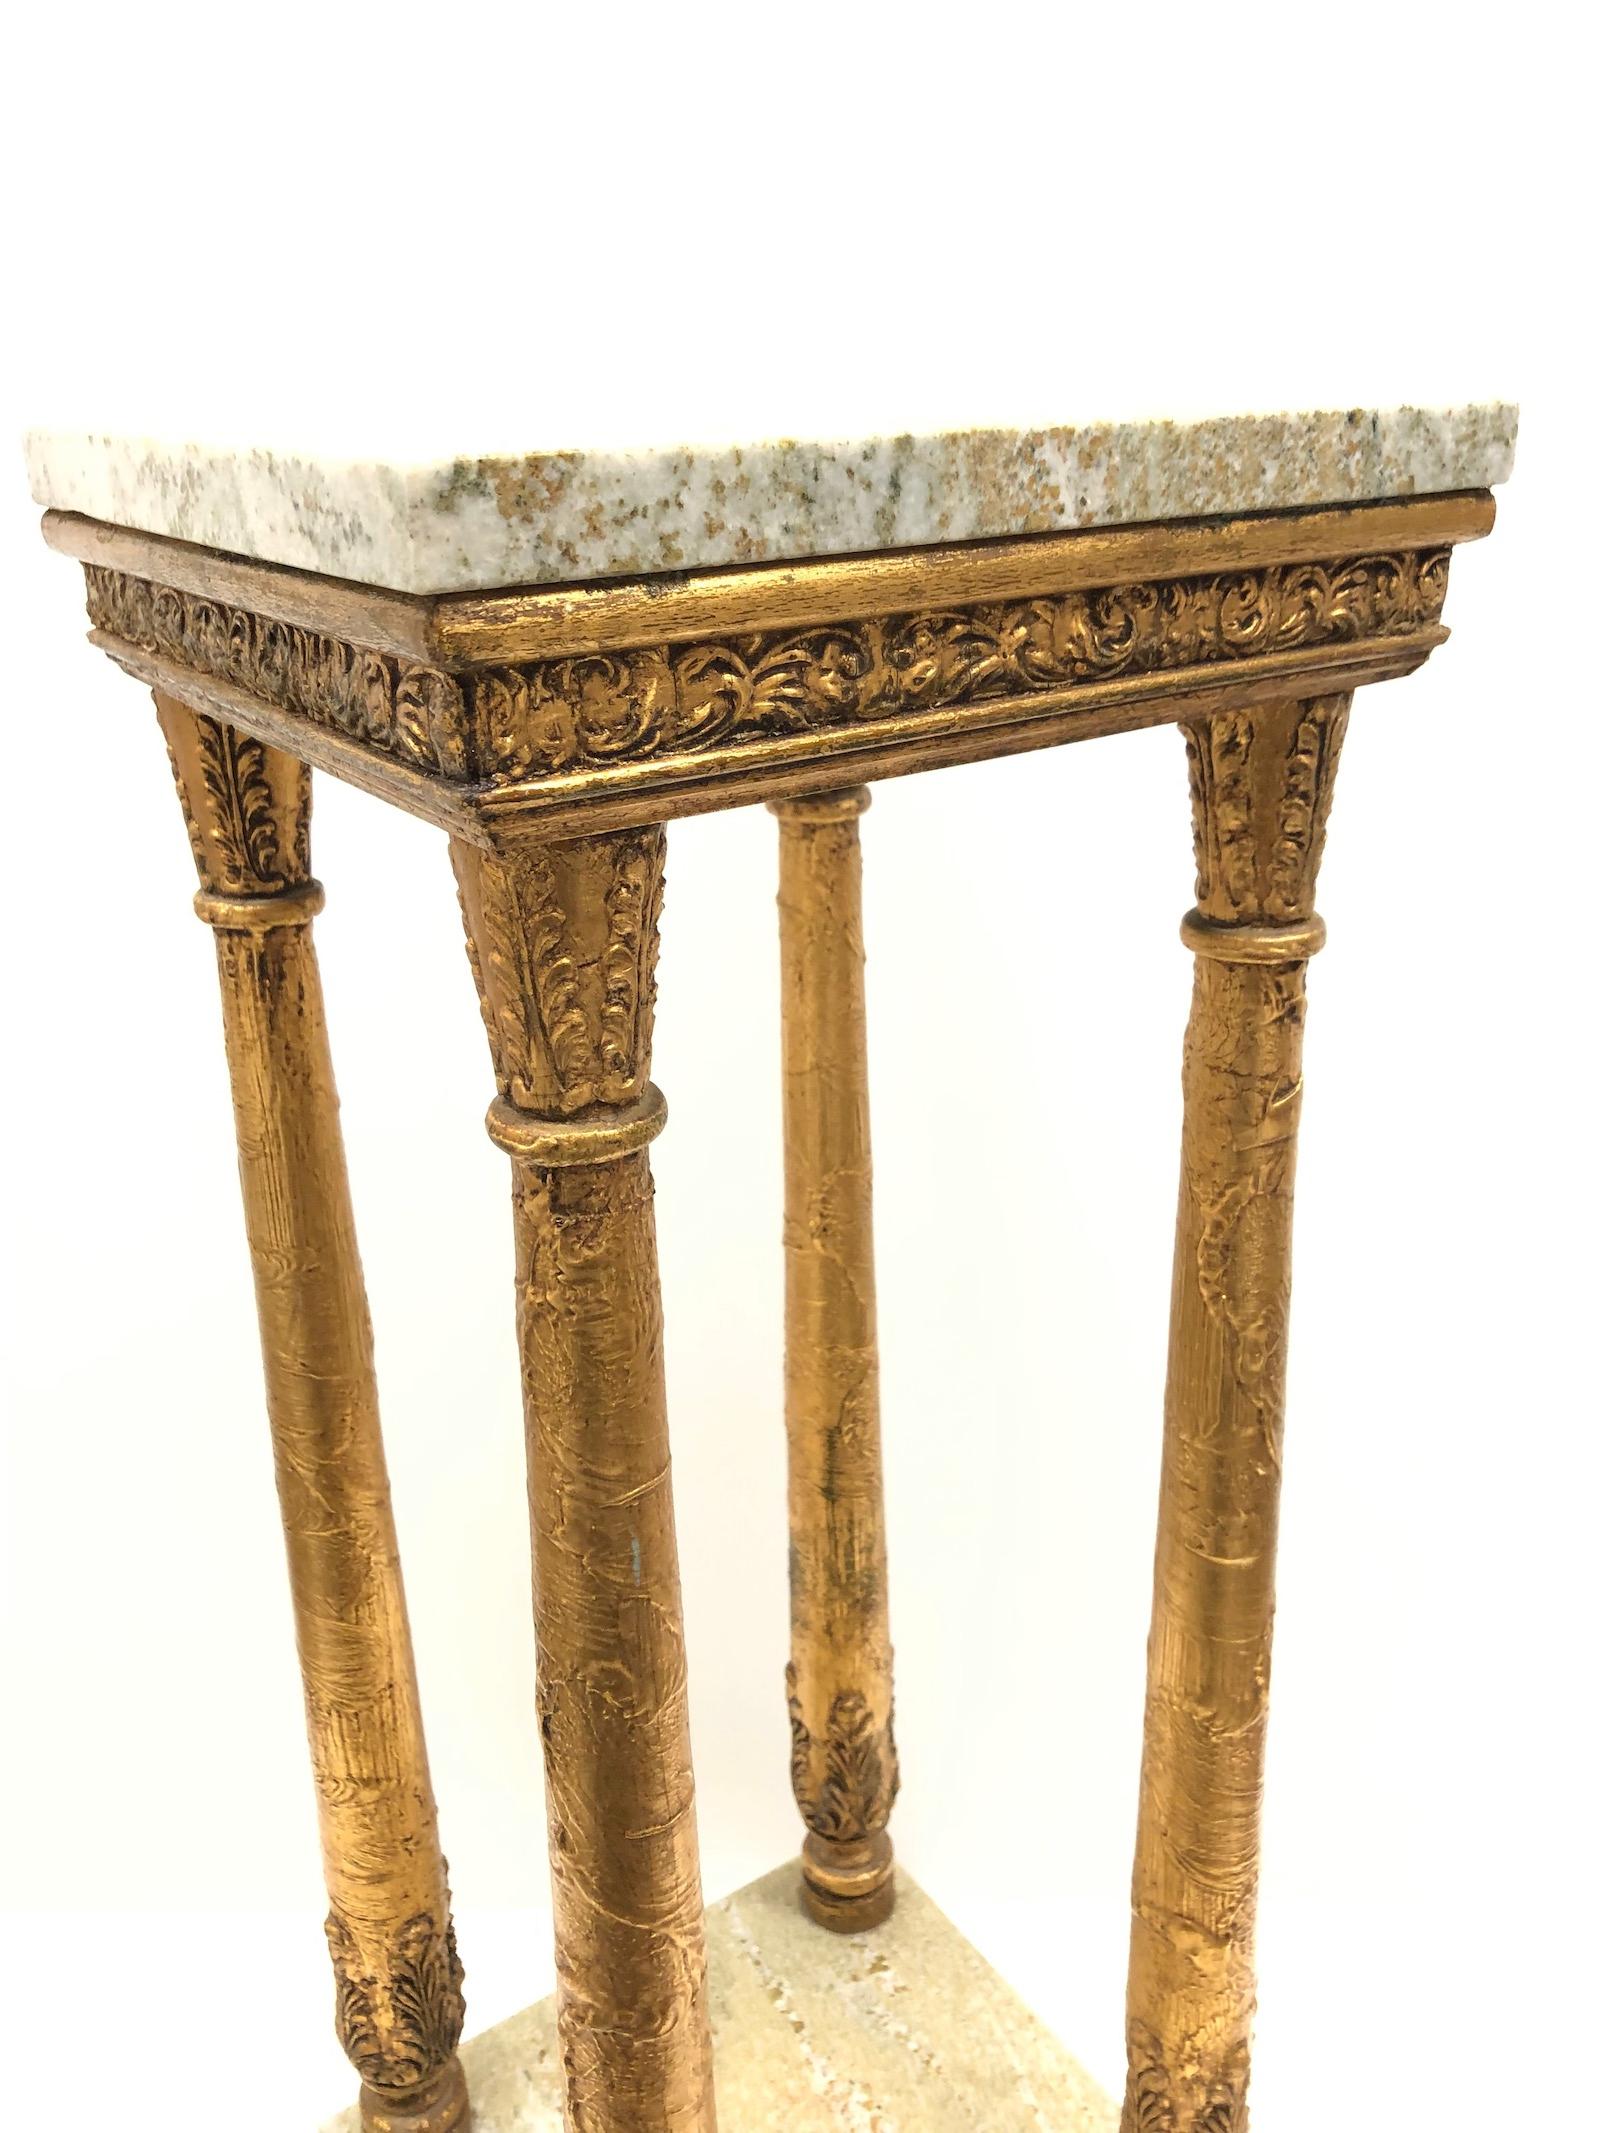 Late 19th Century Carved Gilt wood Tole ware Console Pedestal Table German 5